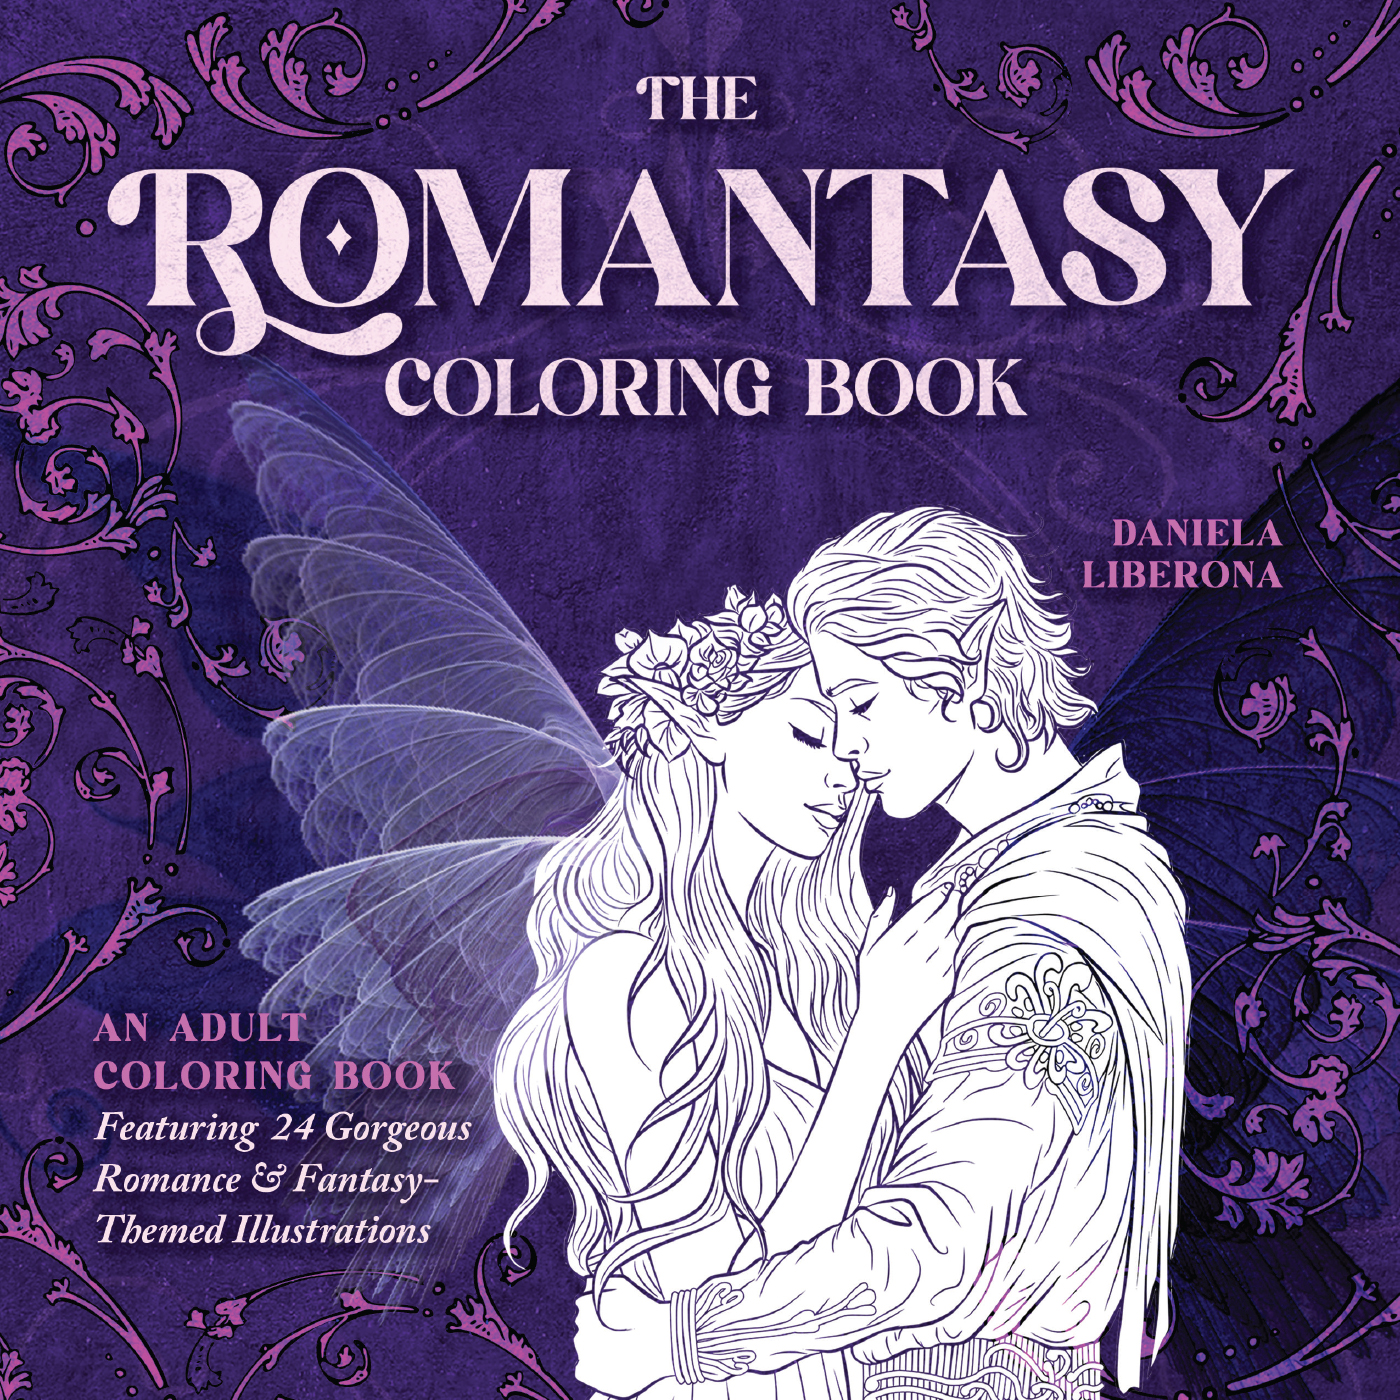 Romantasy Coloring Book-front.indd